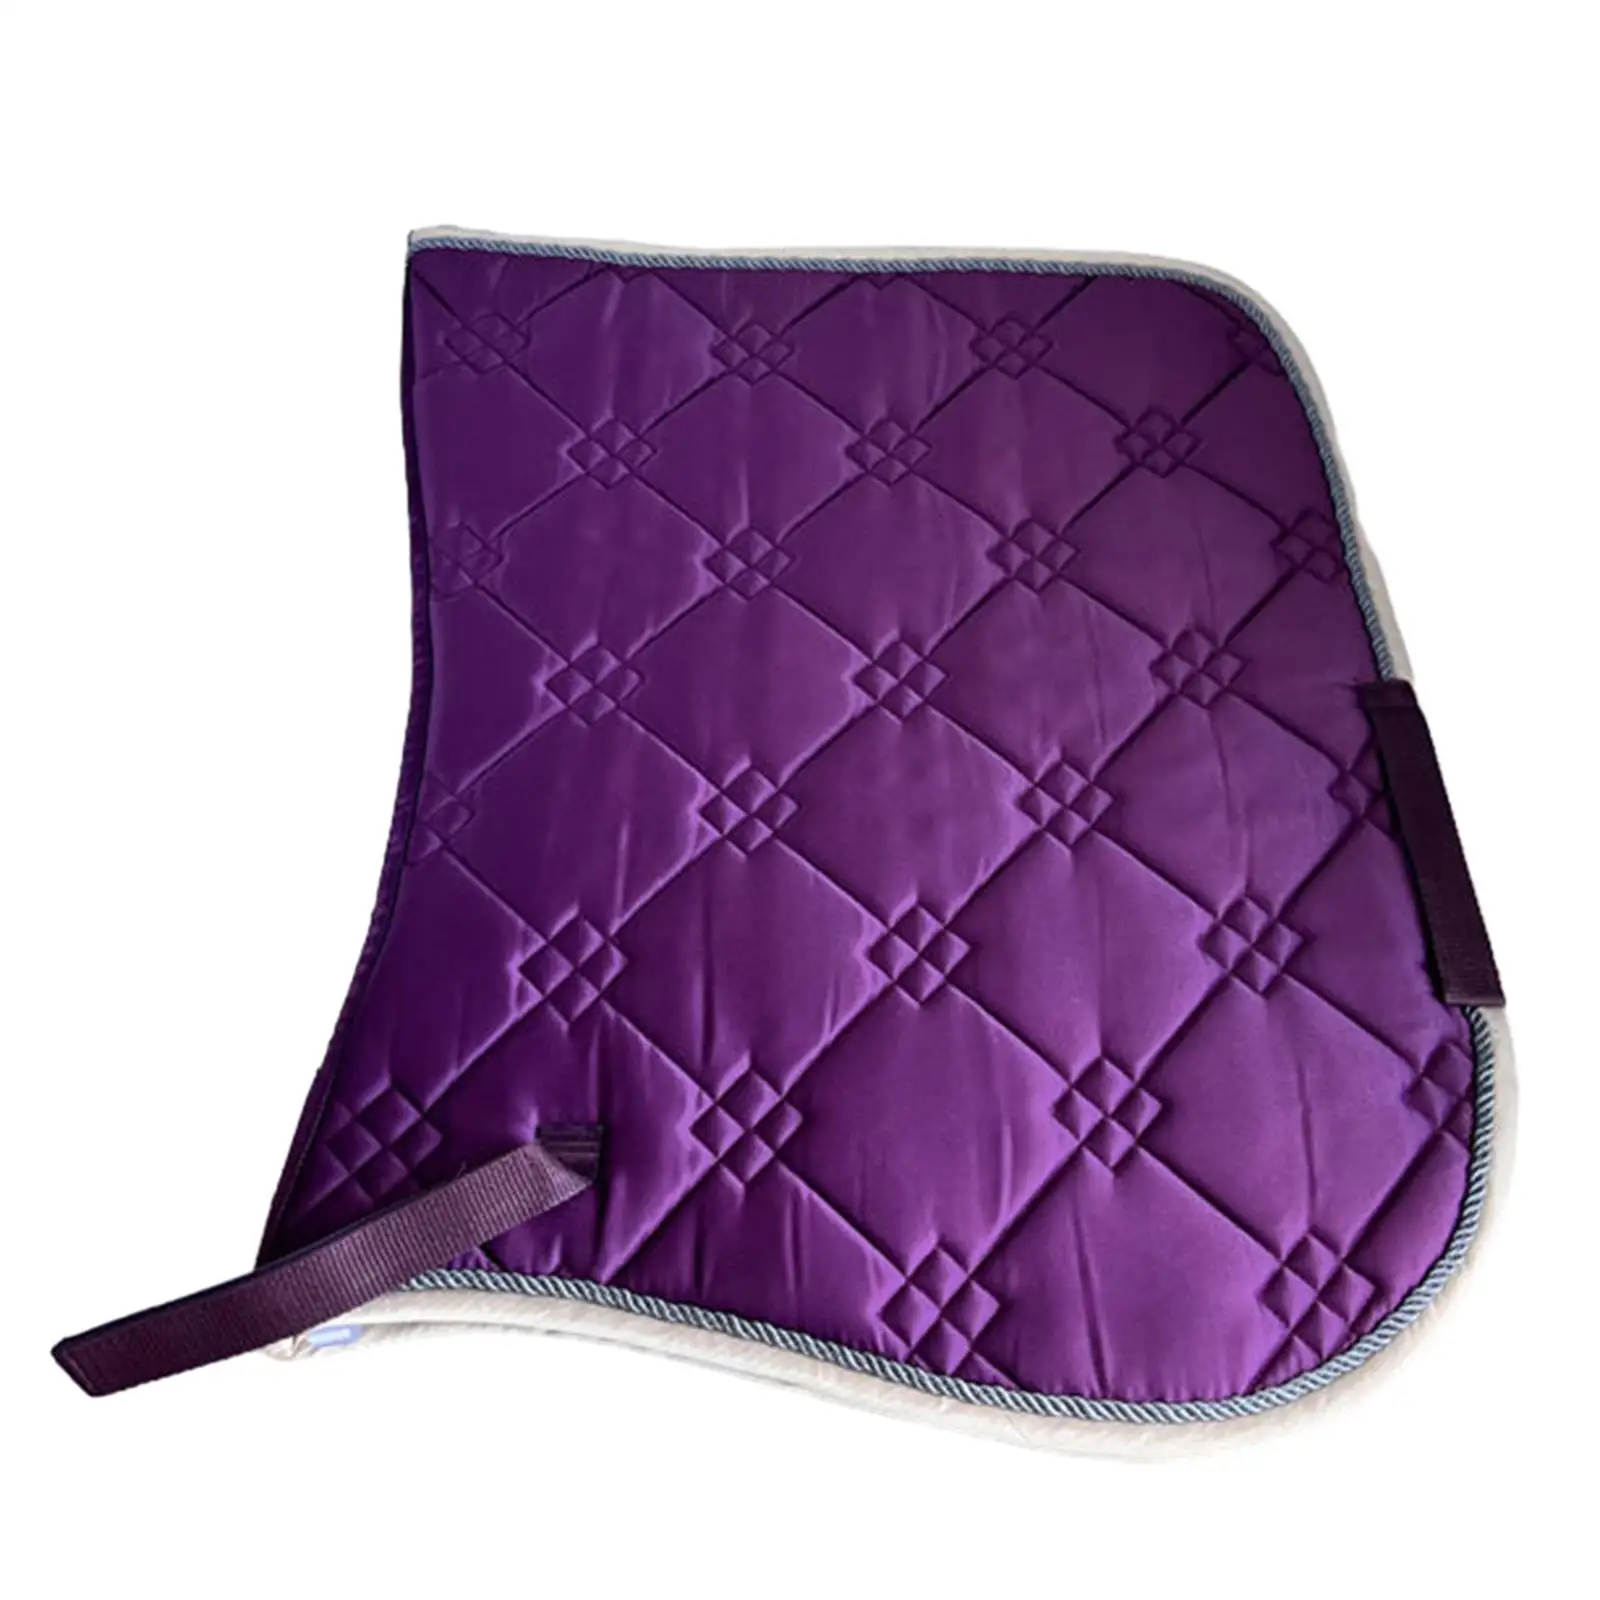 Saddle Pad for Horse Dressage Pad Riding Padding Sports Soft Protection Nonslip Portable Shock Absorbing